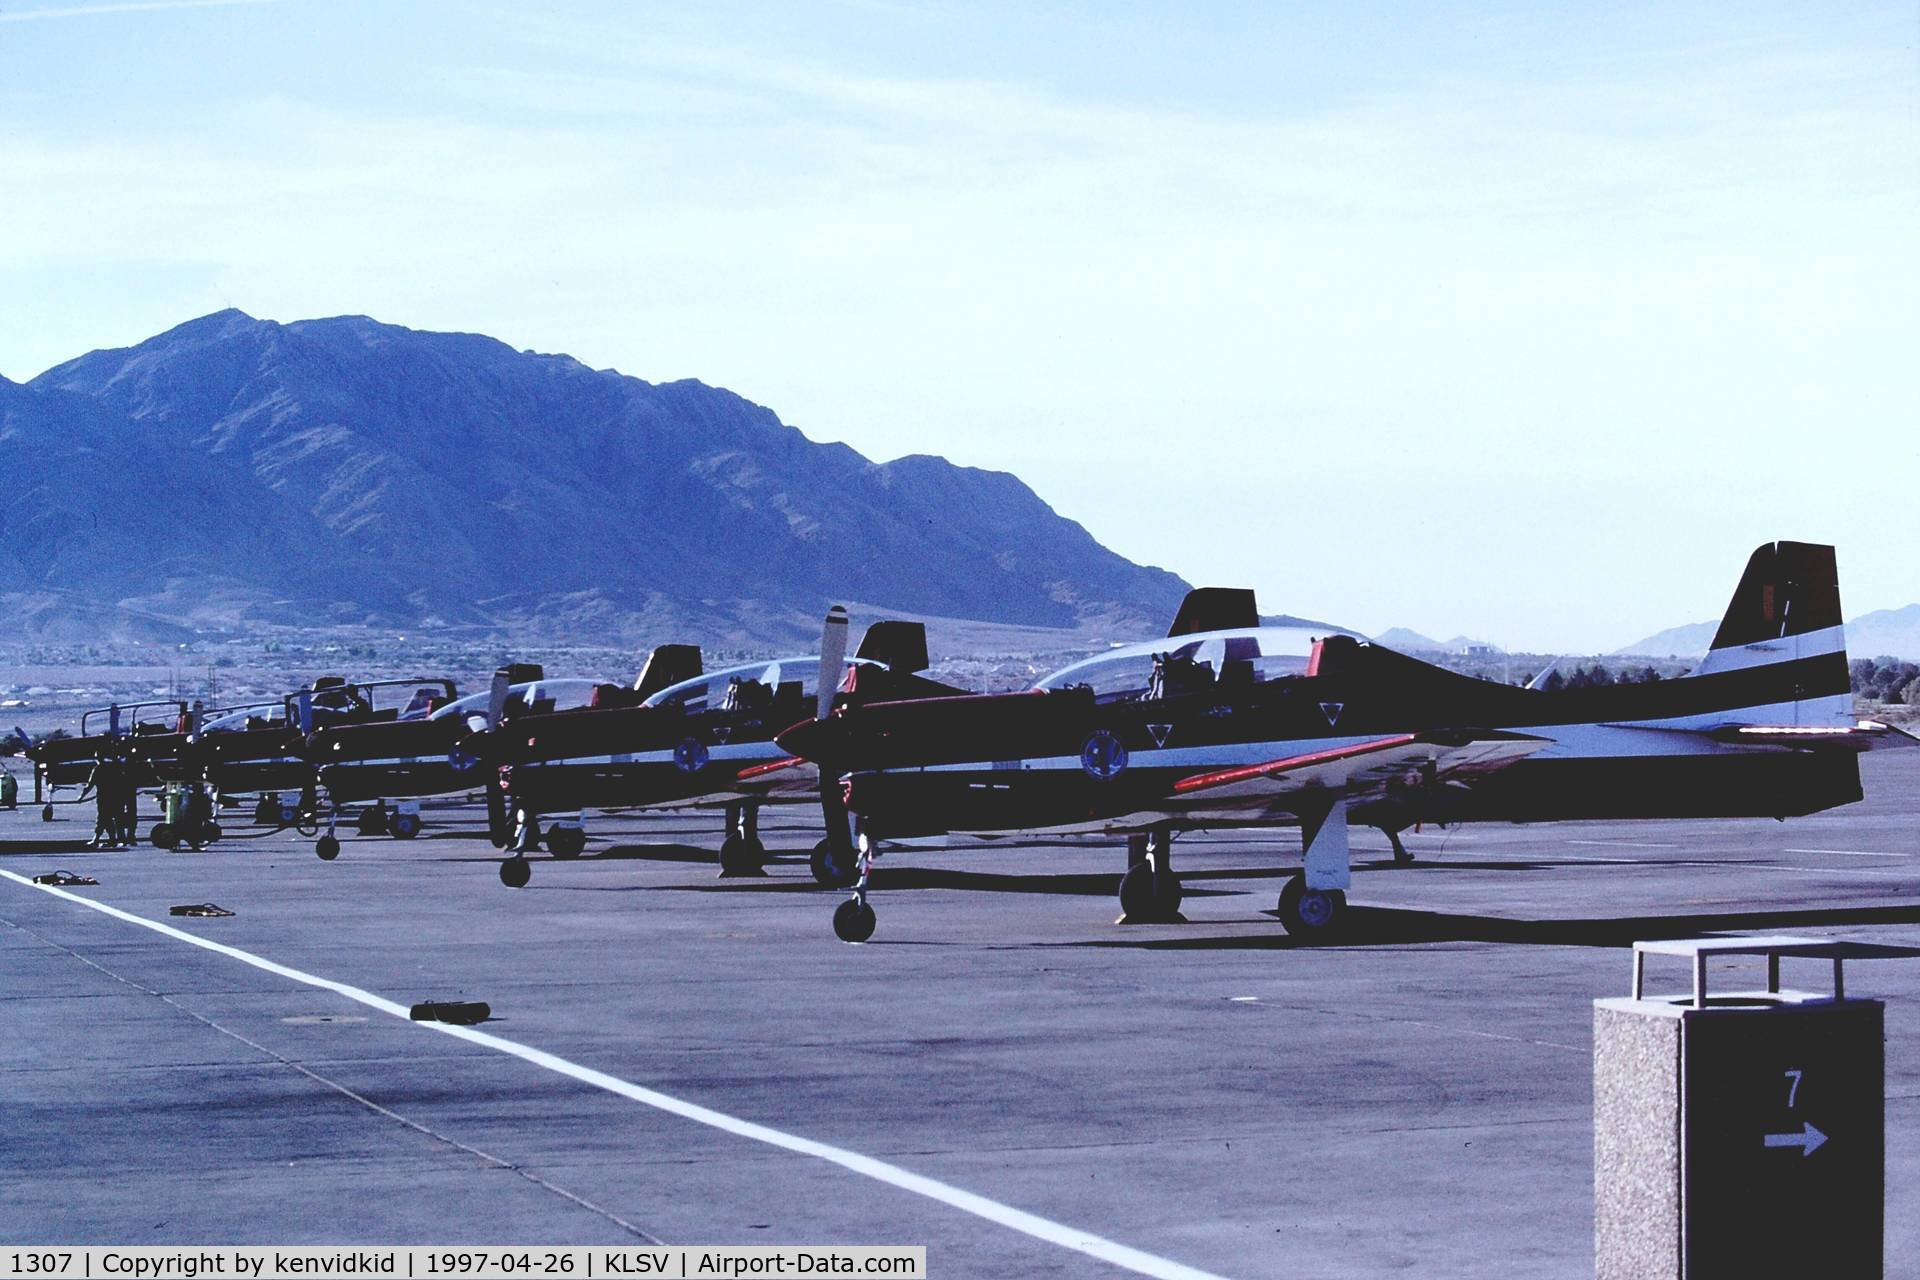 1307, Embraer T-27 Tucano (EMB-312) C/N 312011, At the 1997 Golden Air Tattoo, Nellis.